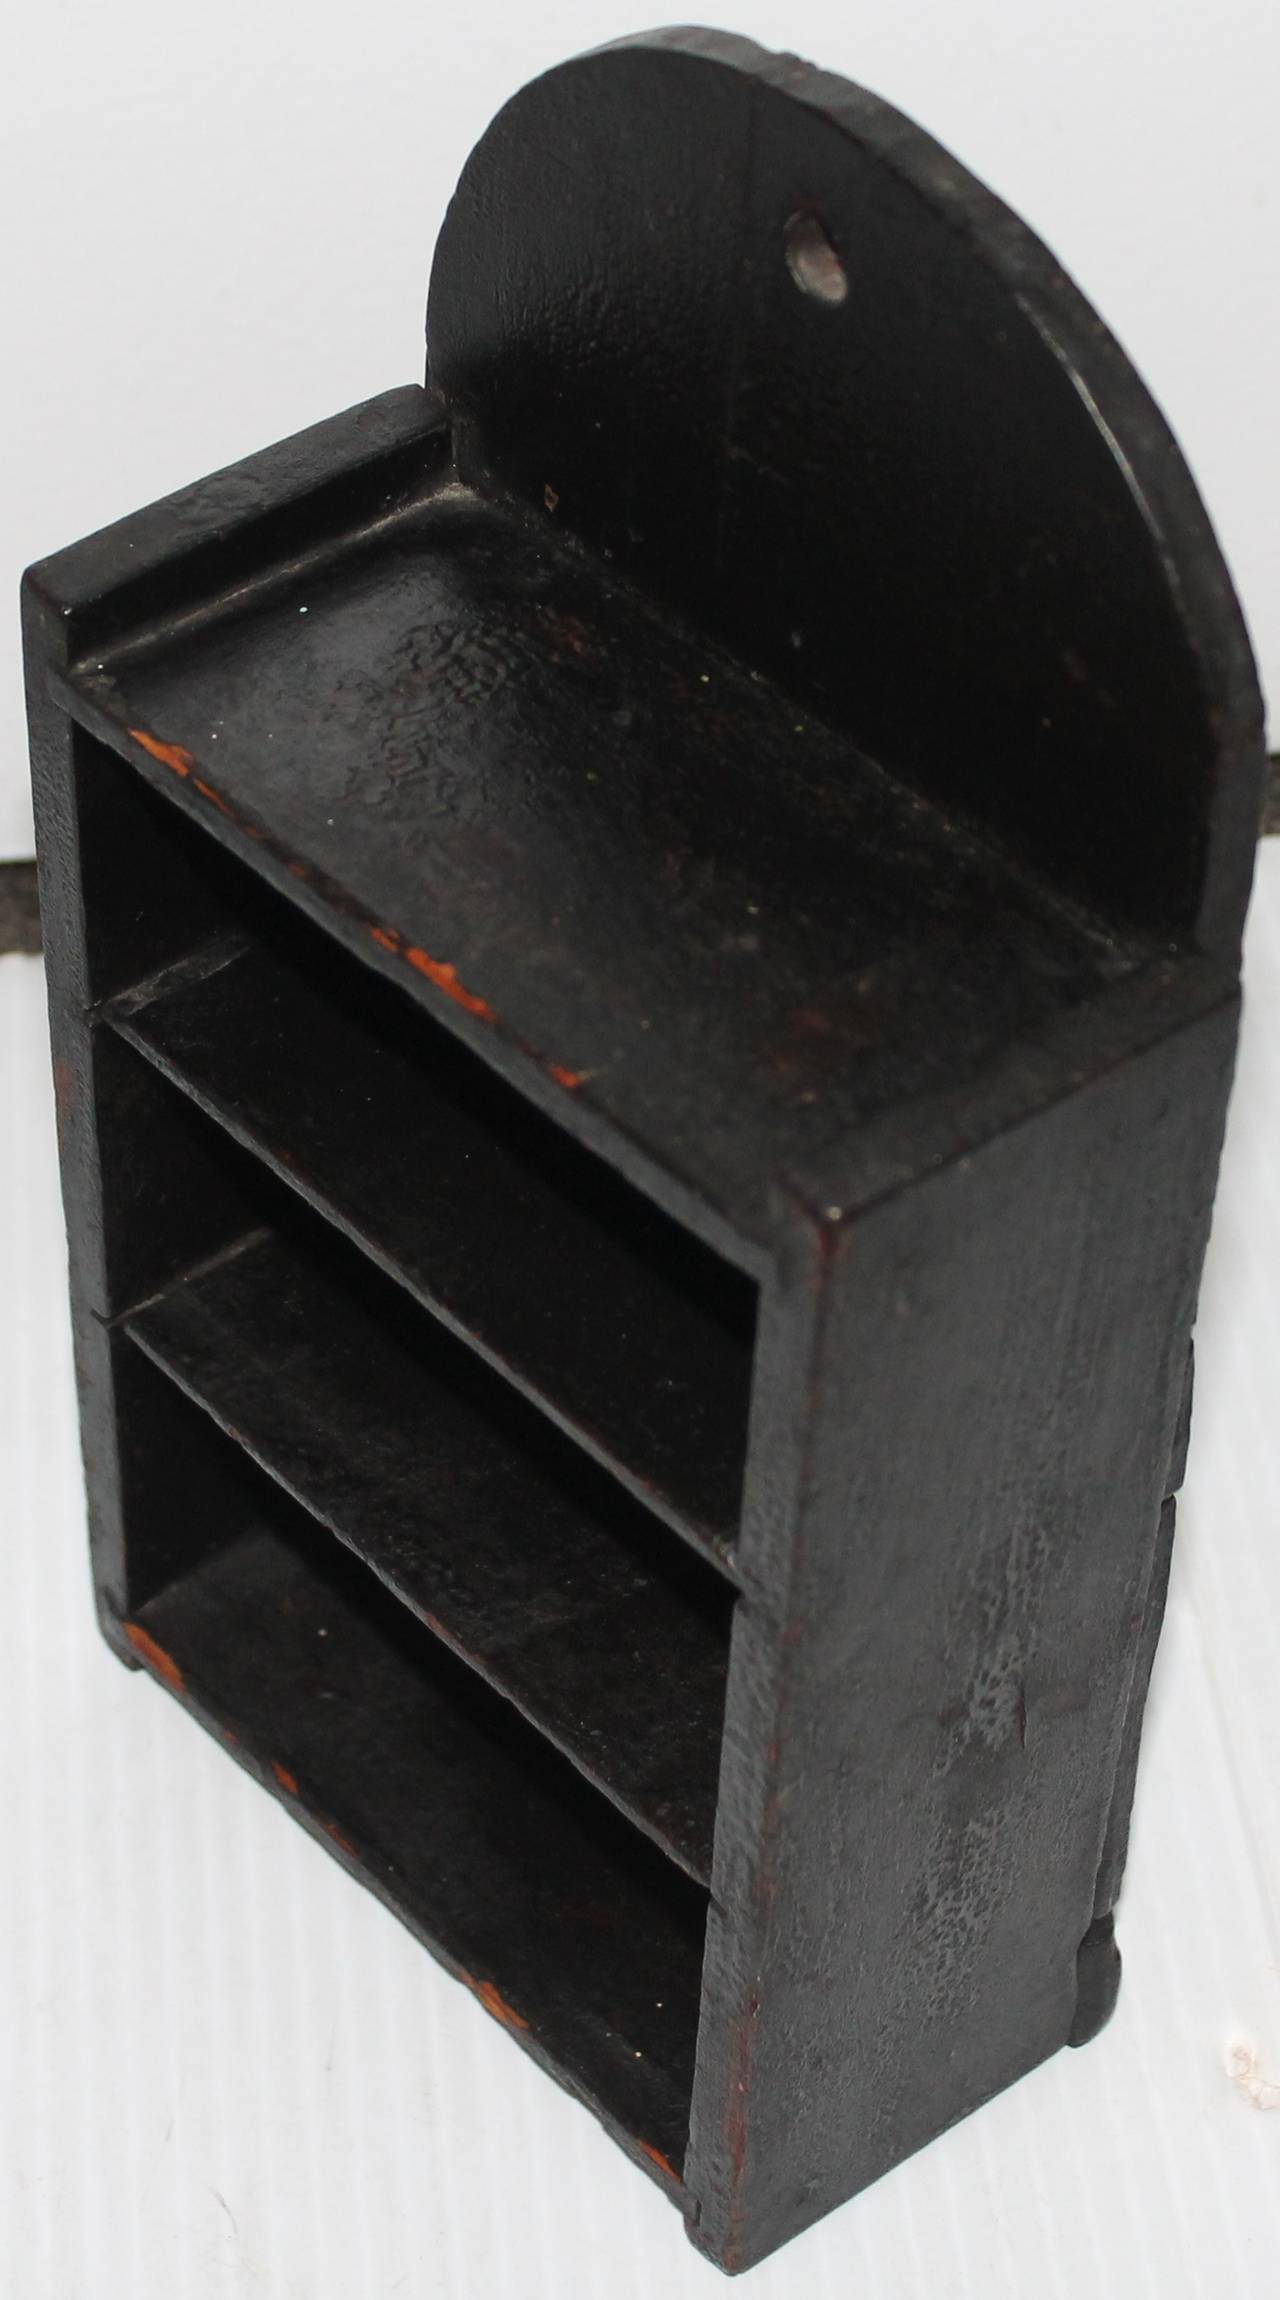 This 19th century black painted wall box shelf was found in Pennsylvania and is in all original black painted surfaces. This alligatored surface shelf was made for tiny smalls or collectables. It also could be used for small Folk Art pieces. The